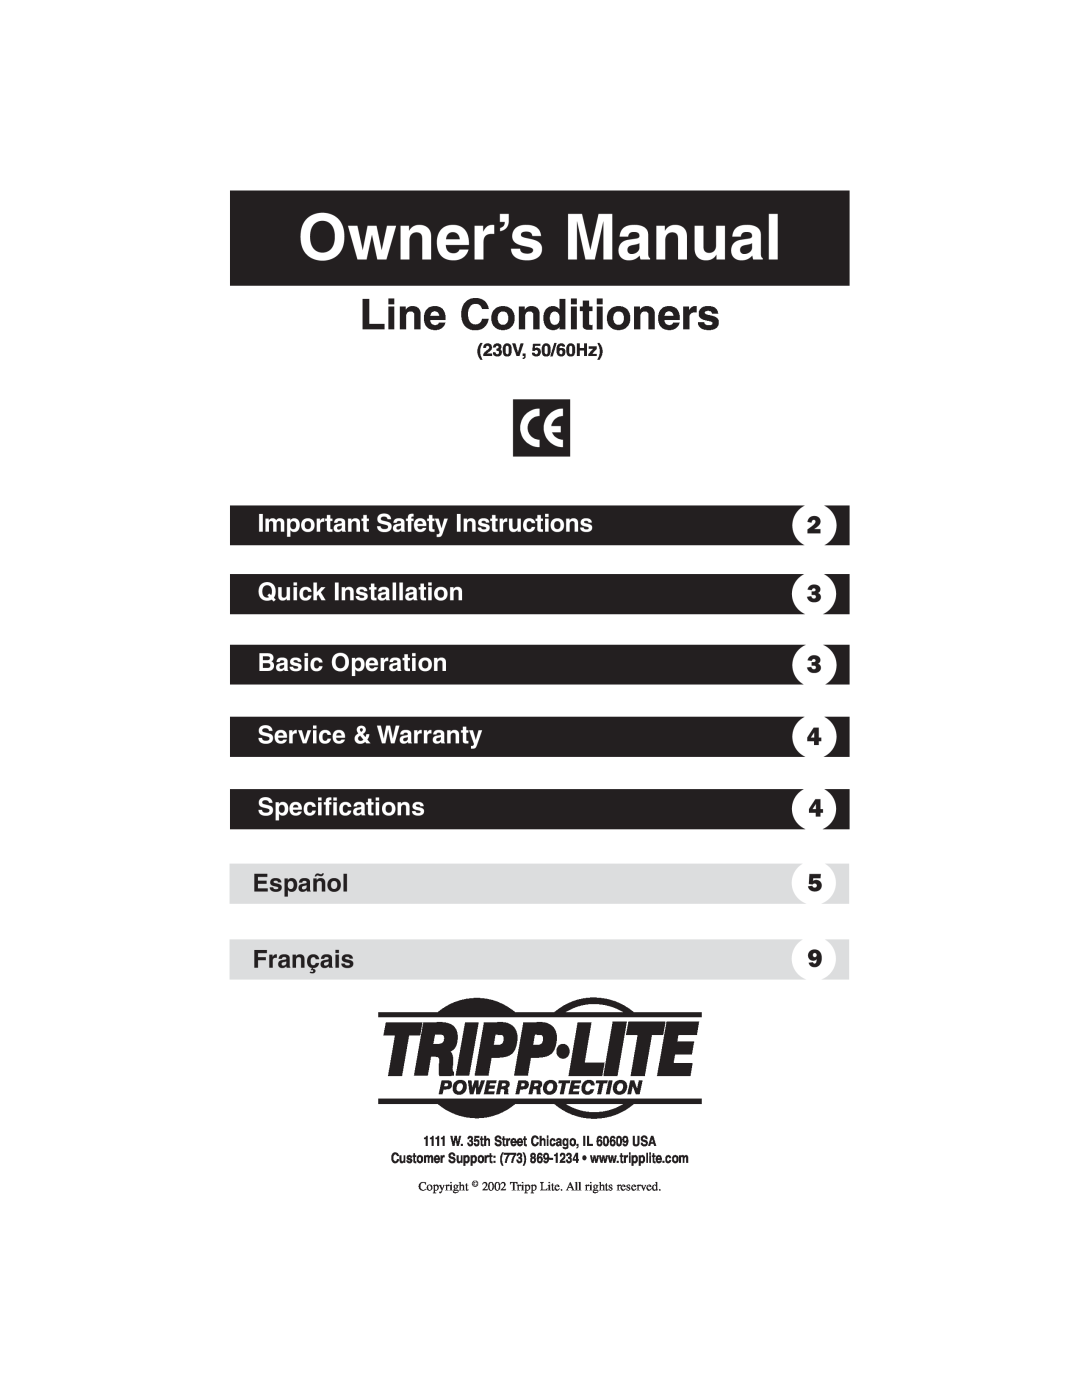 Tripp Lite 200204171 93-2036_EN owner manual Important Safety Instructions, Quick Installation, Basic Operation, Español 